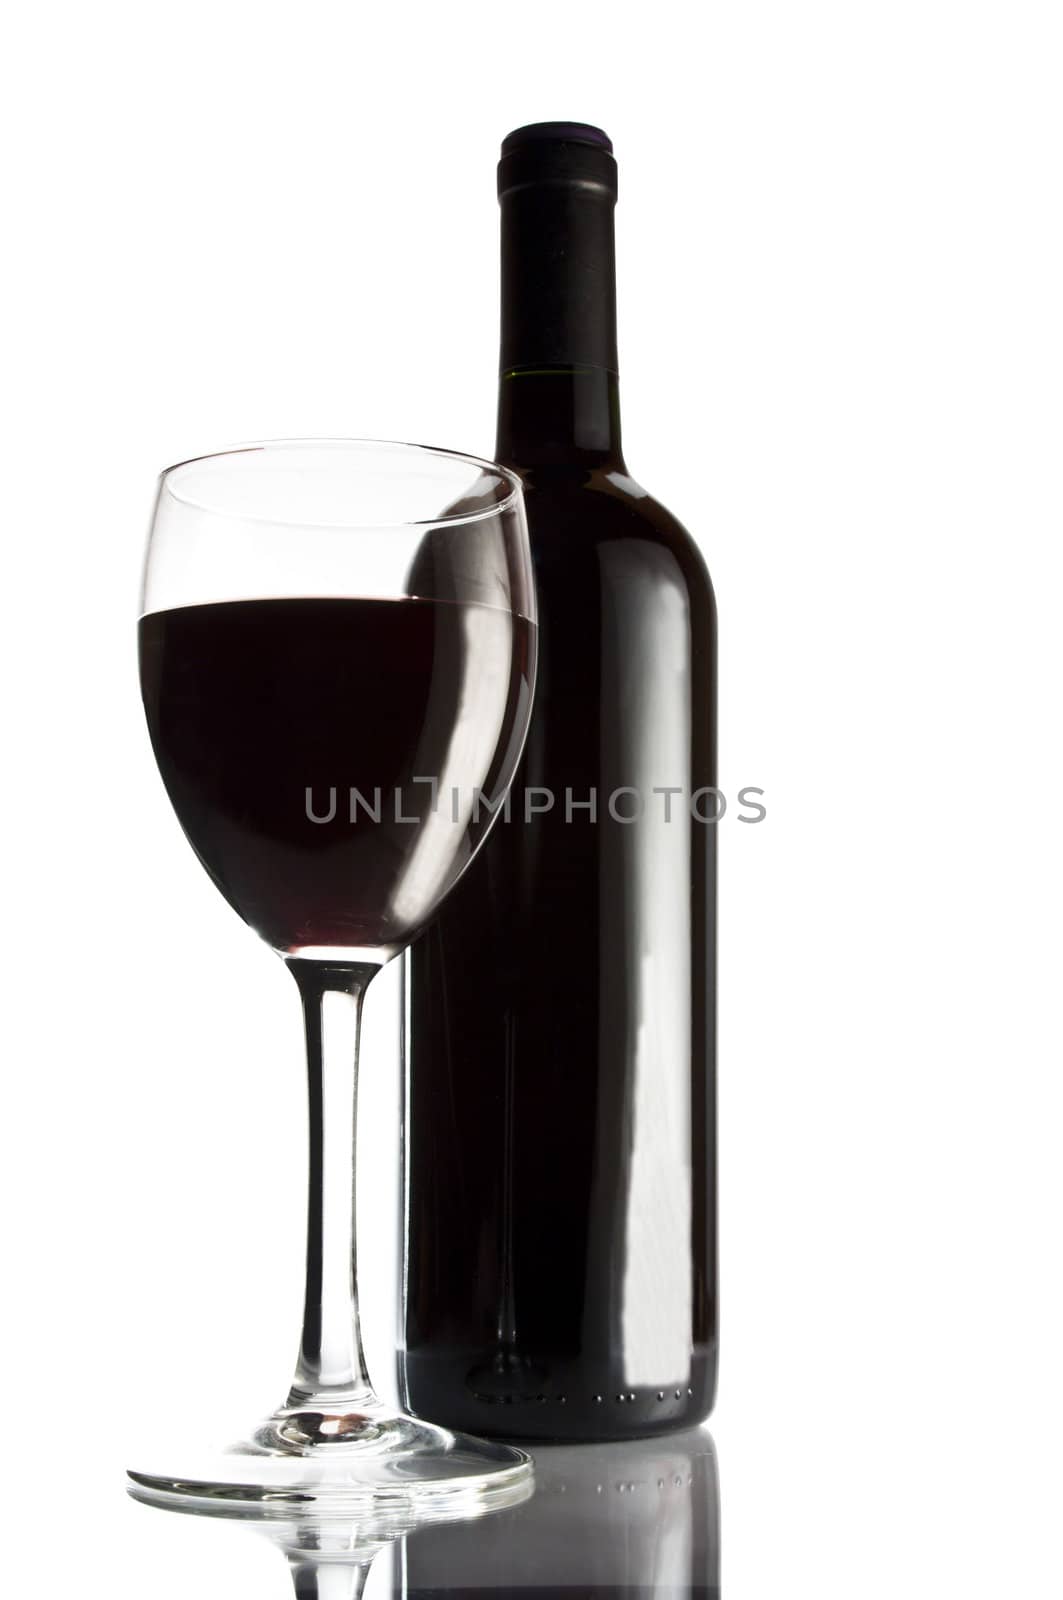 Bottle of red wine and glass. Studio shot.